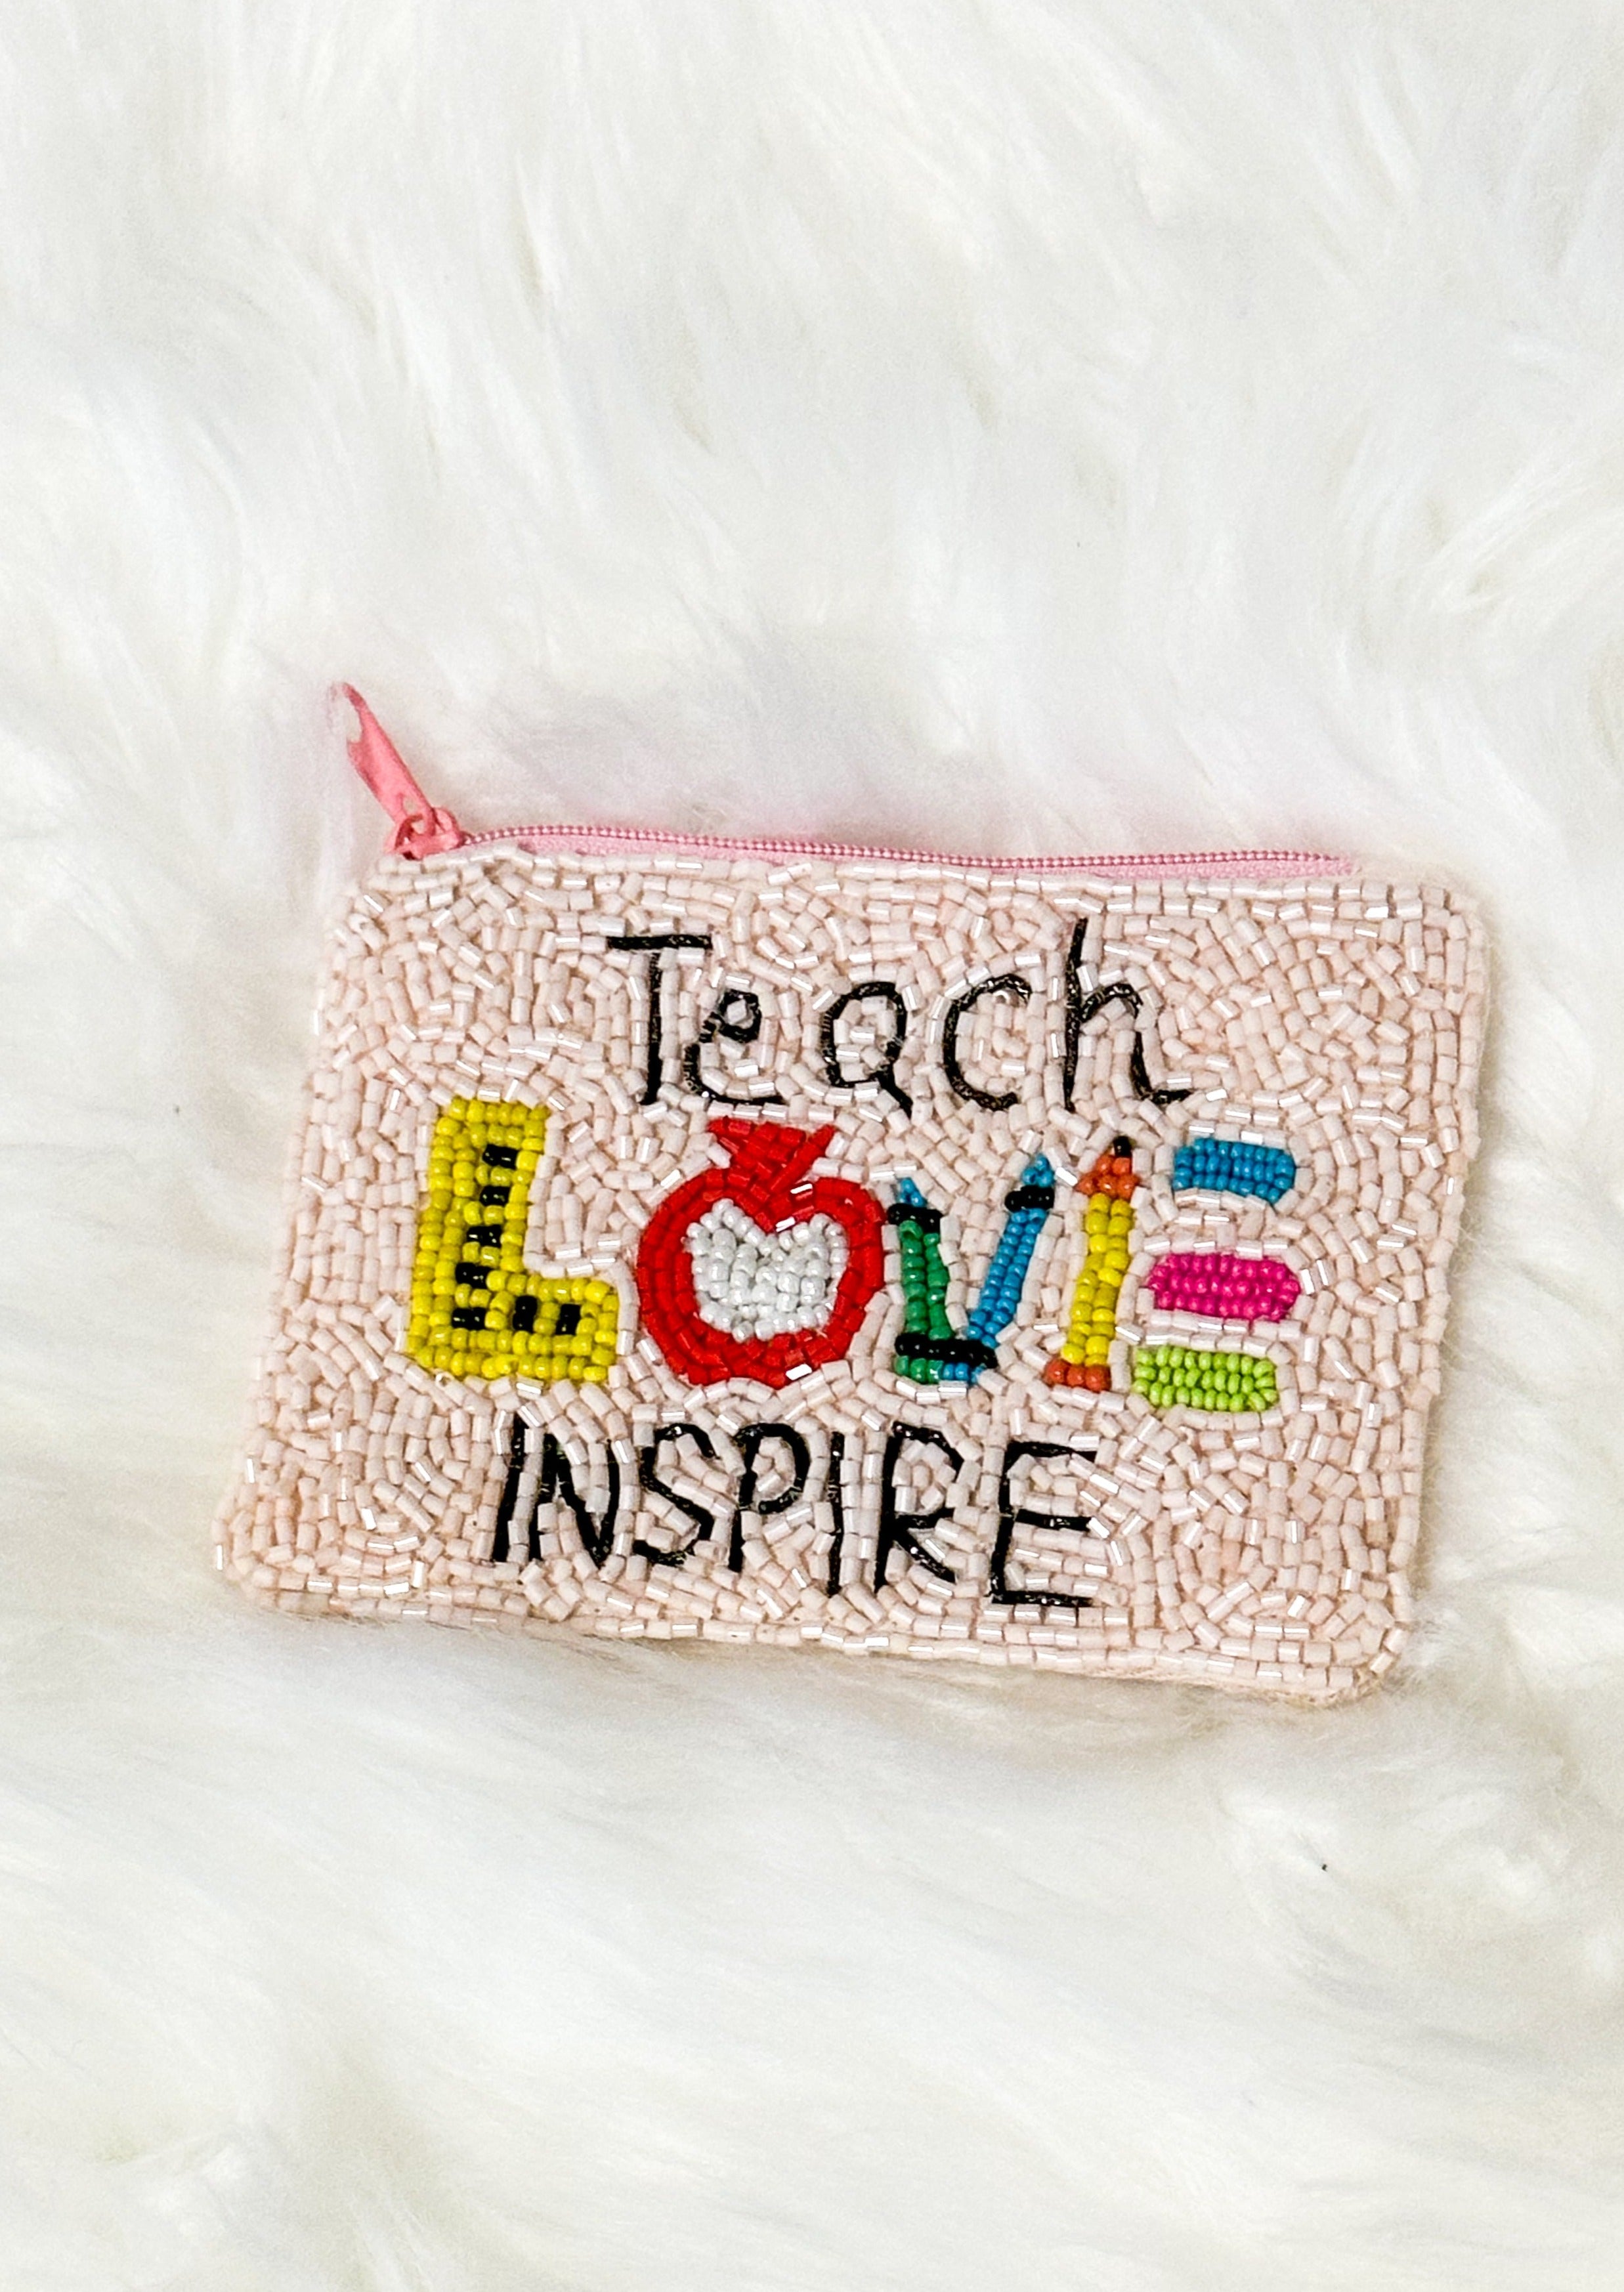 Teach Love Inspire Seed Bead Coin Purse - light pink beads with pink zipper - teach and inspire in black beads - love spelled out with a ruler, apple, crayons and pencil